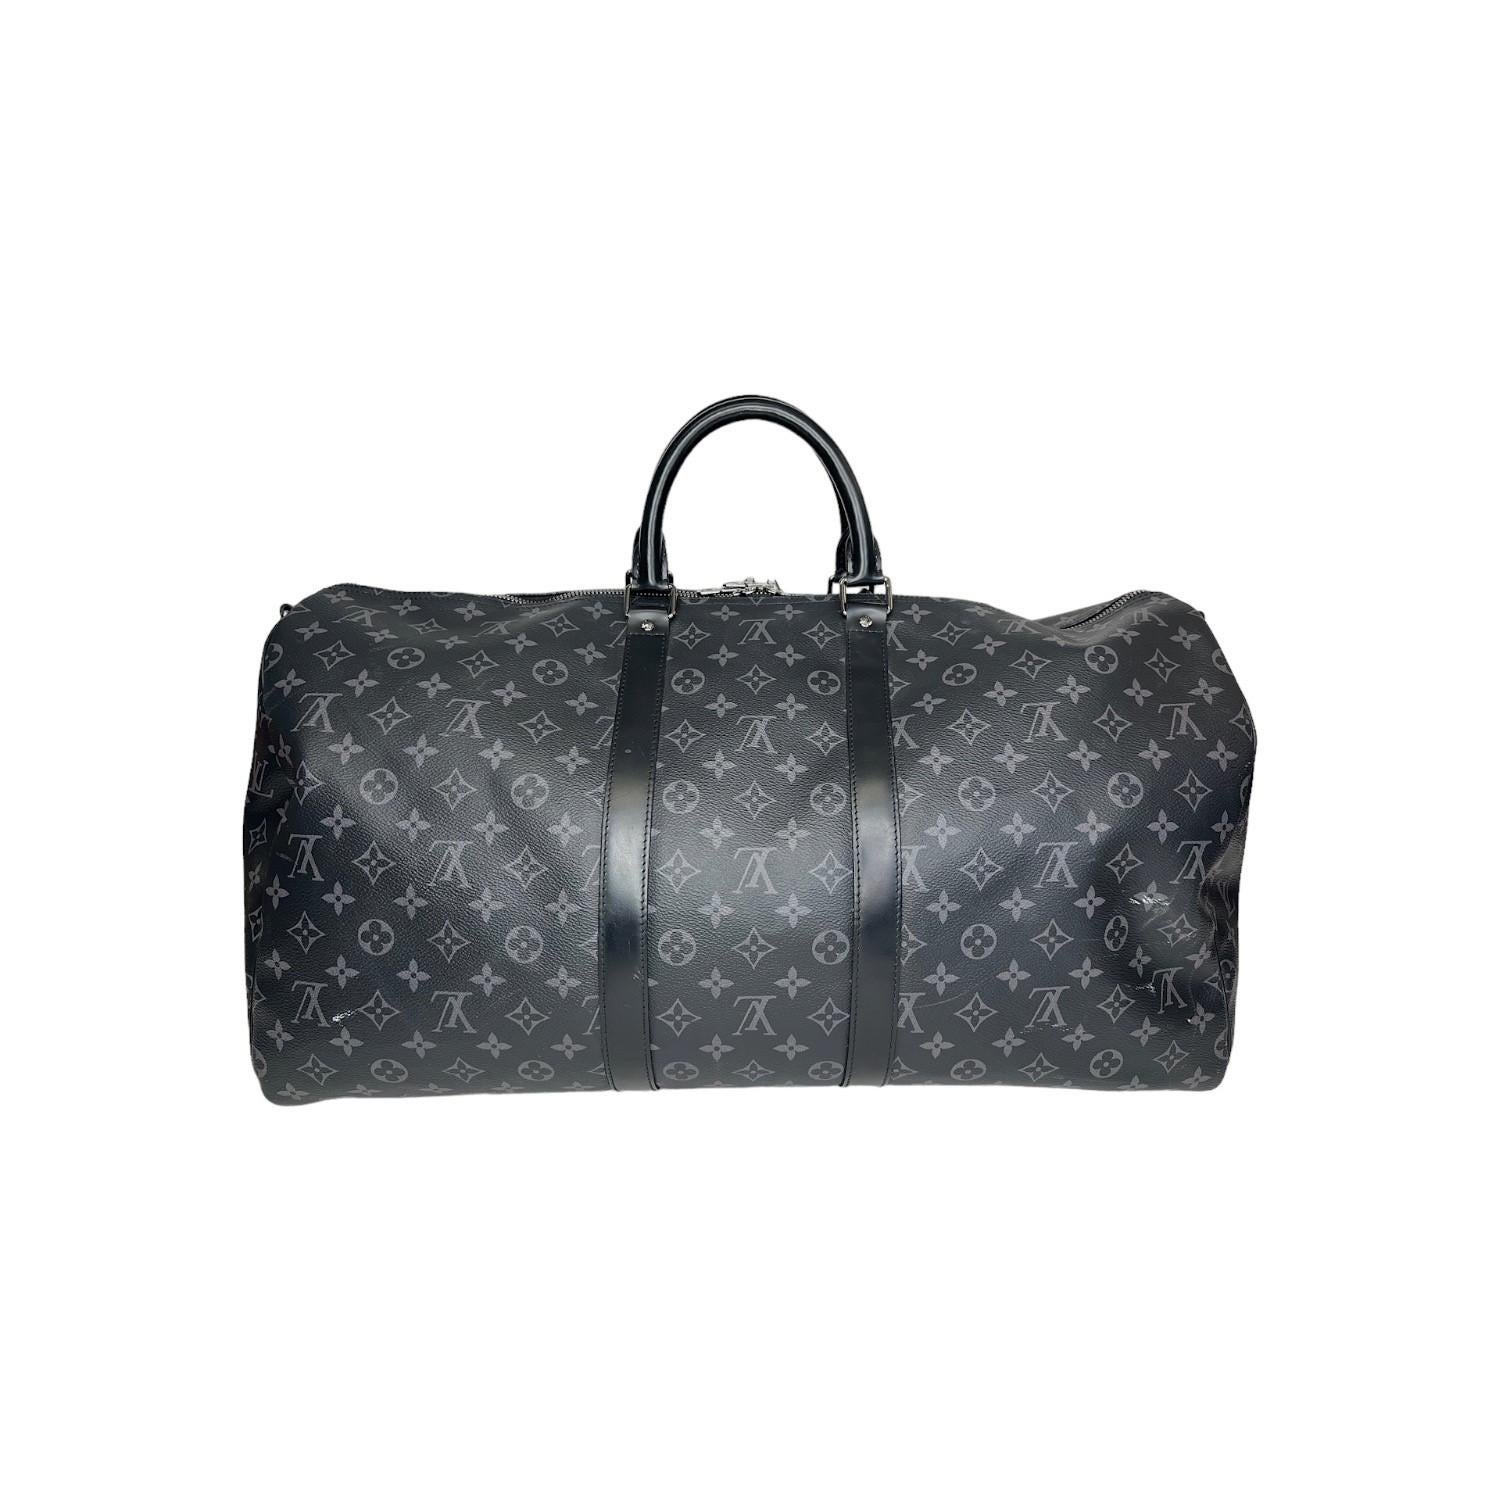 This Louis Vuitton Monogram Eclipse Keepall Bandoulière 55 travel bag was made in the 50th week of 2018 in France and it is finely crafted of the iconic Louis Vuitton Monogram Eclipse canvas exterior with black leather trimmings and silver-tone